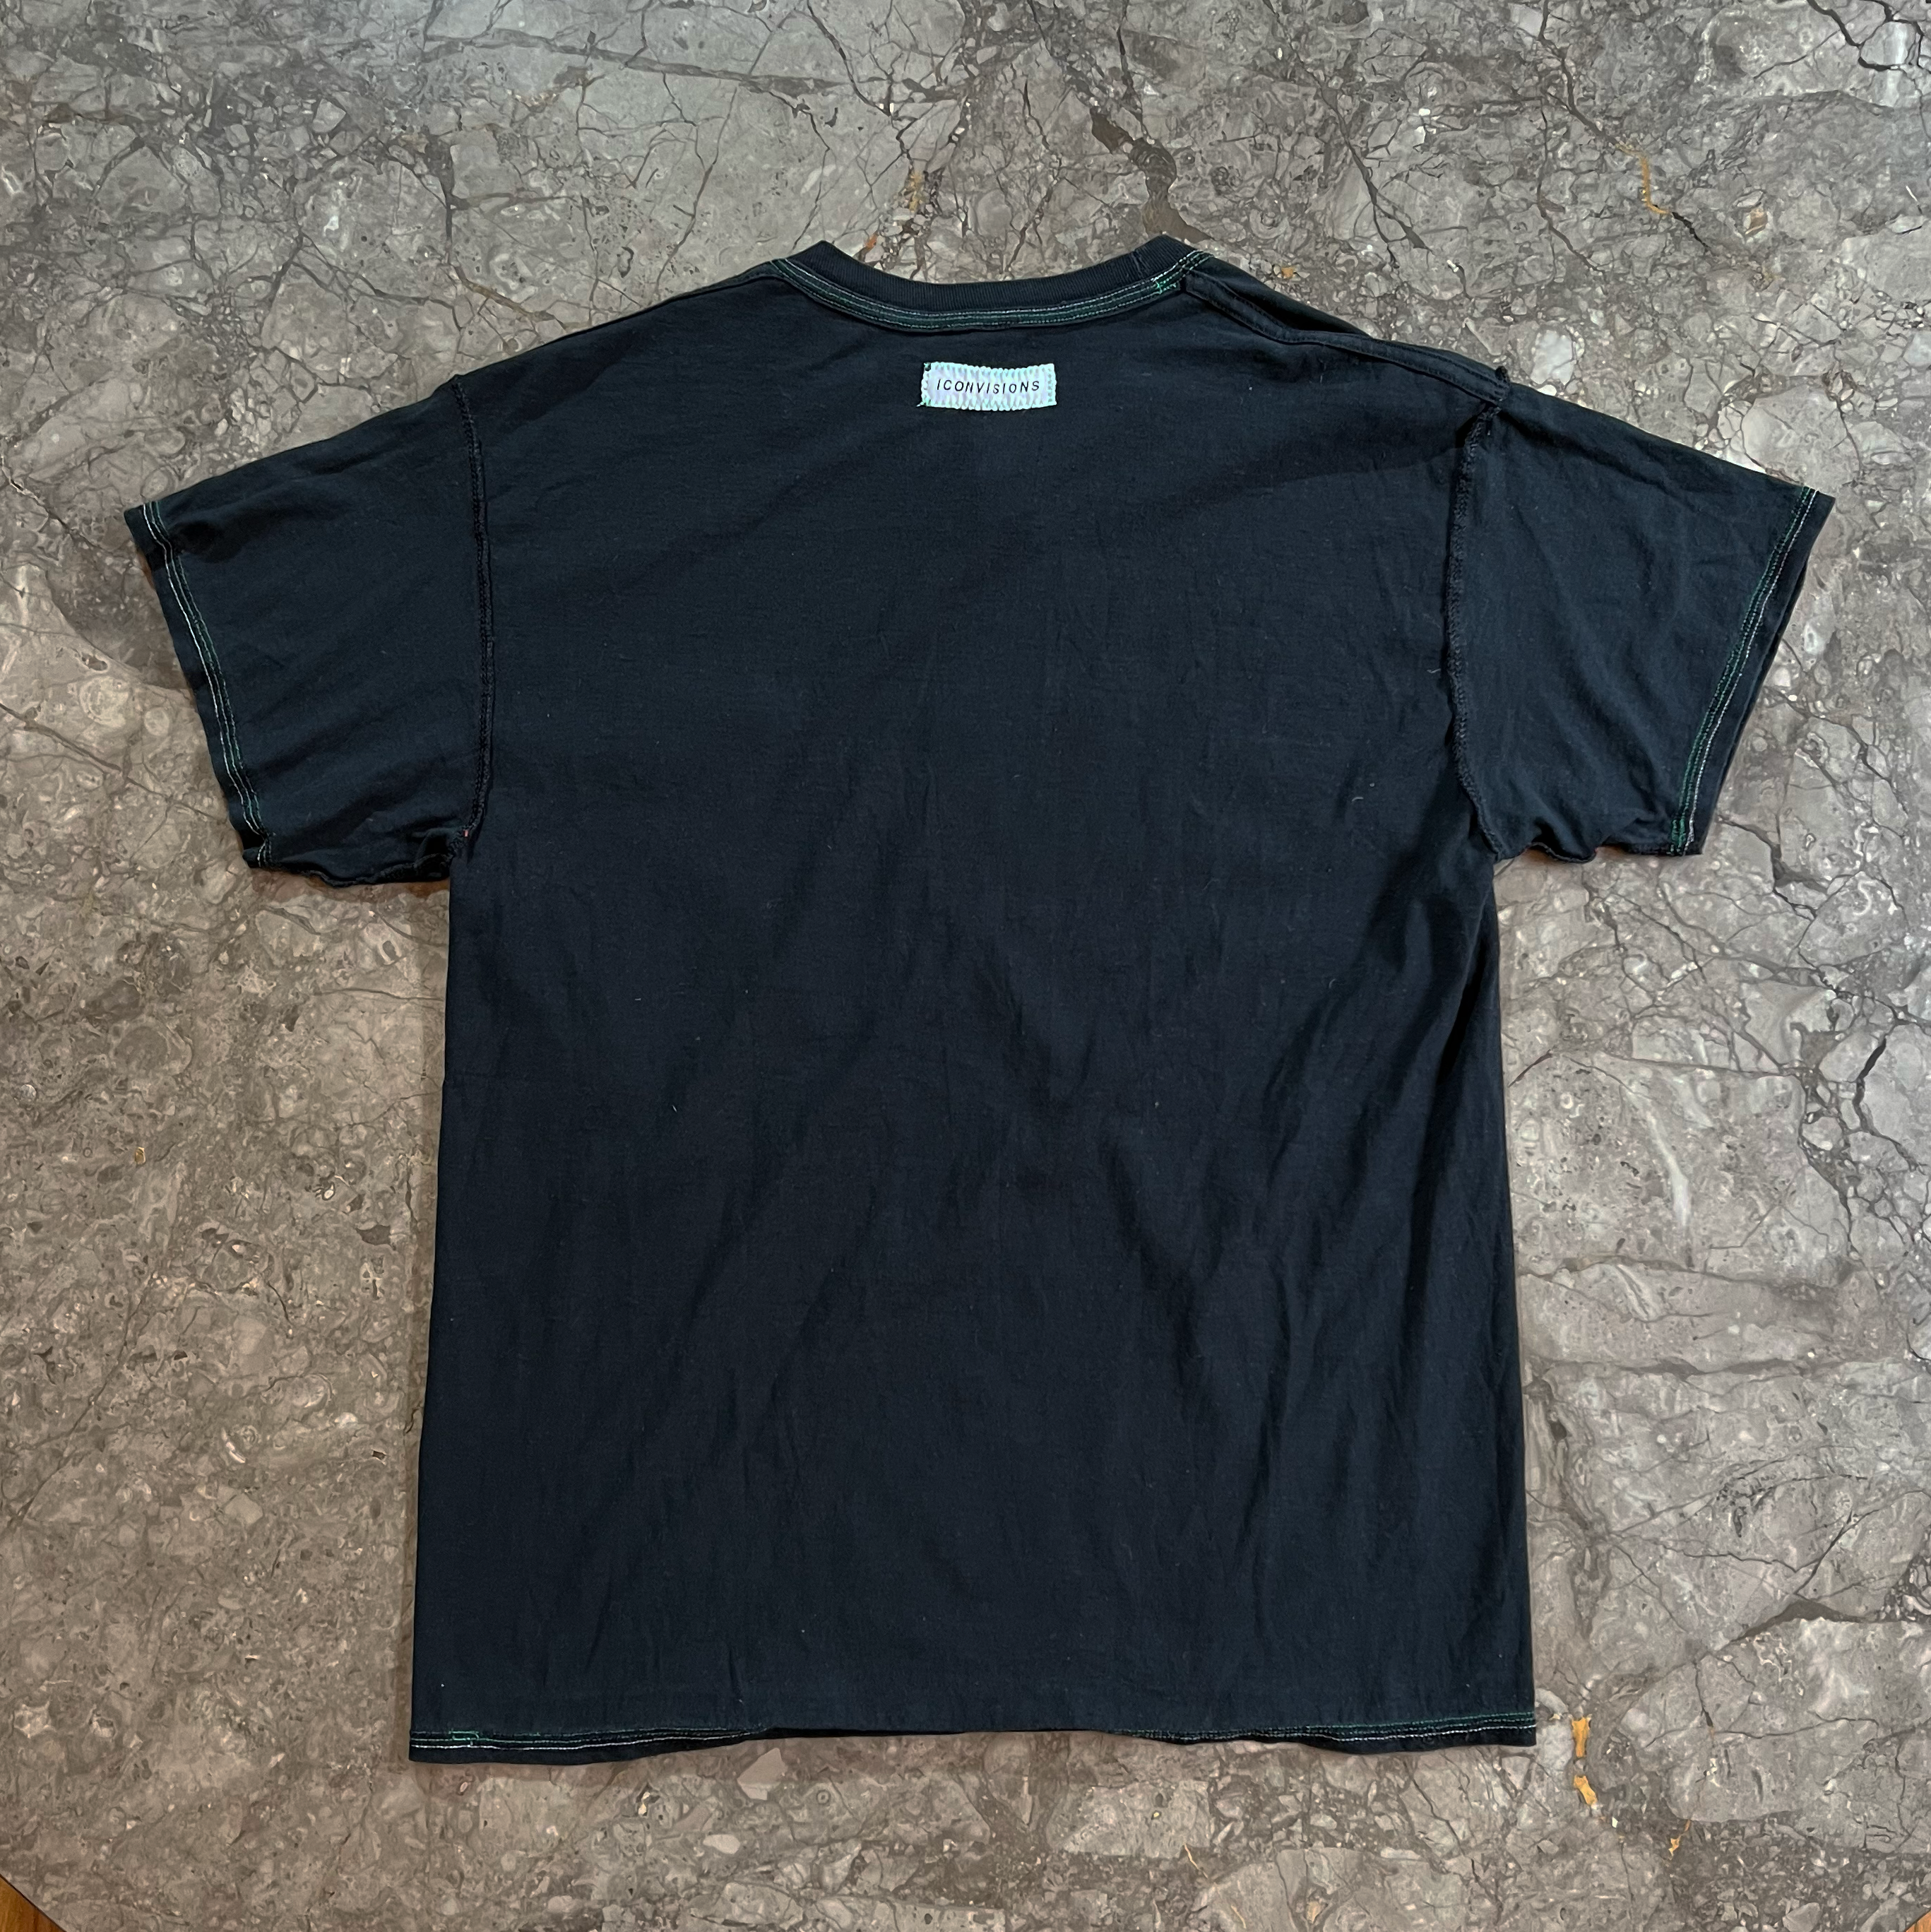 iconvision T-Shirt (Size 3)